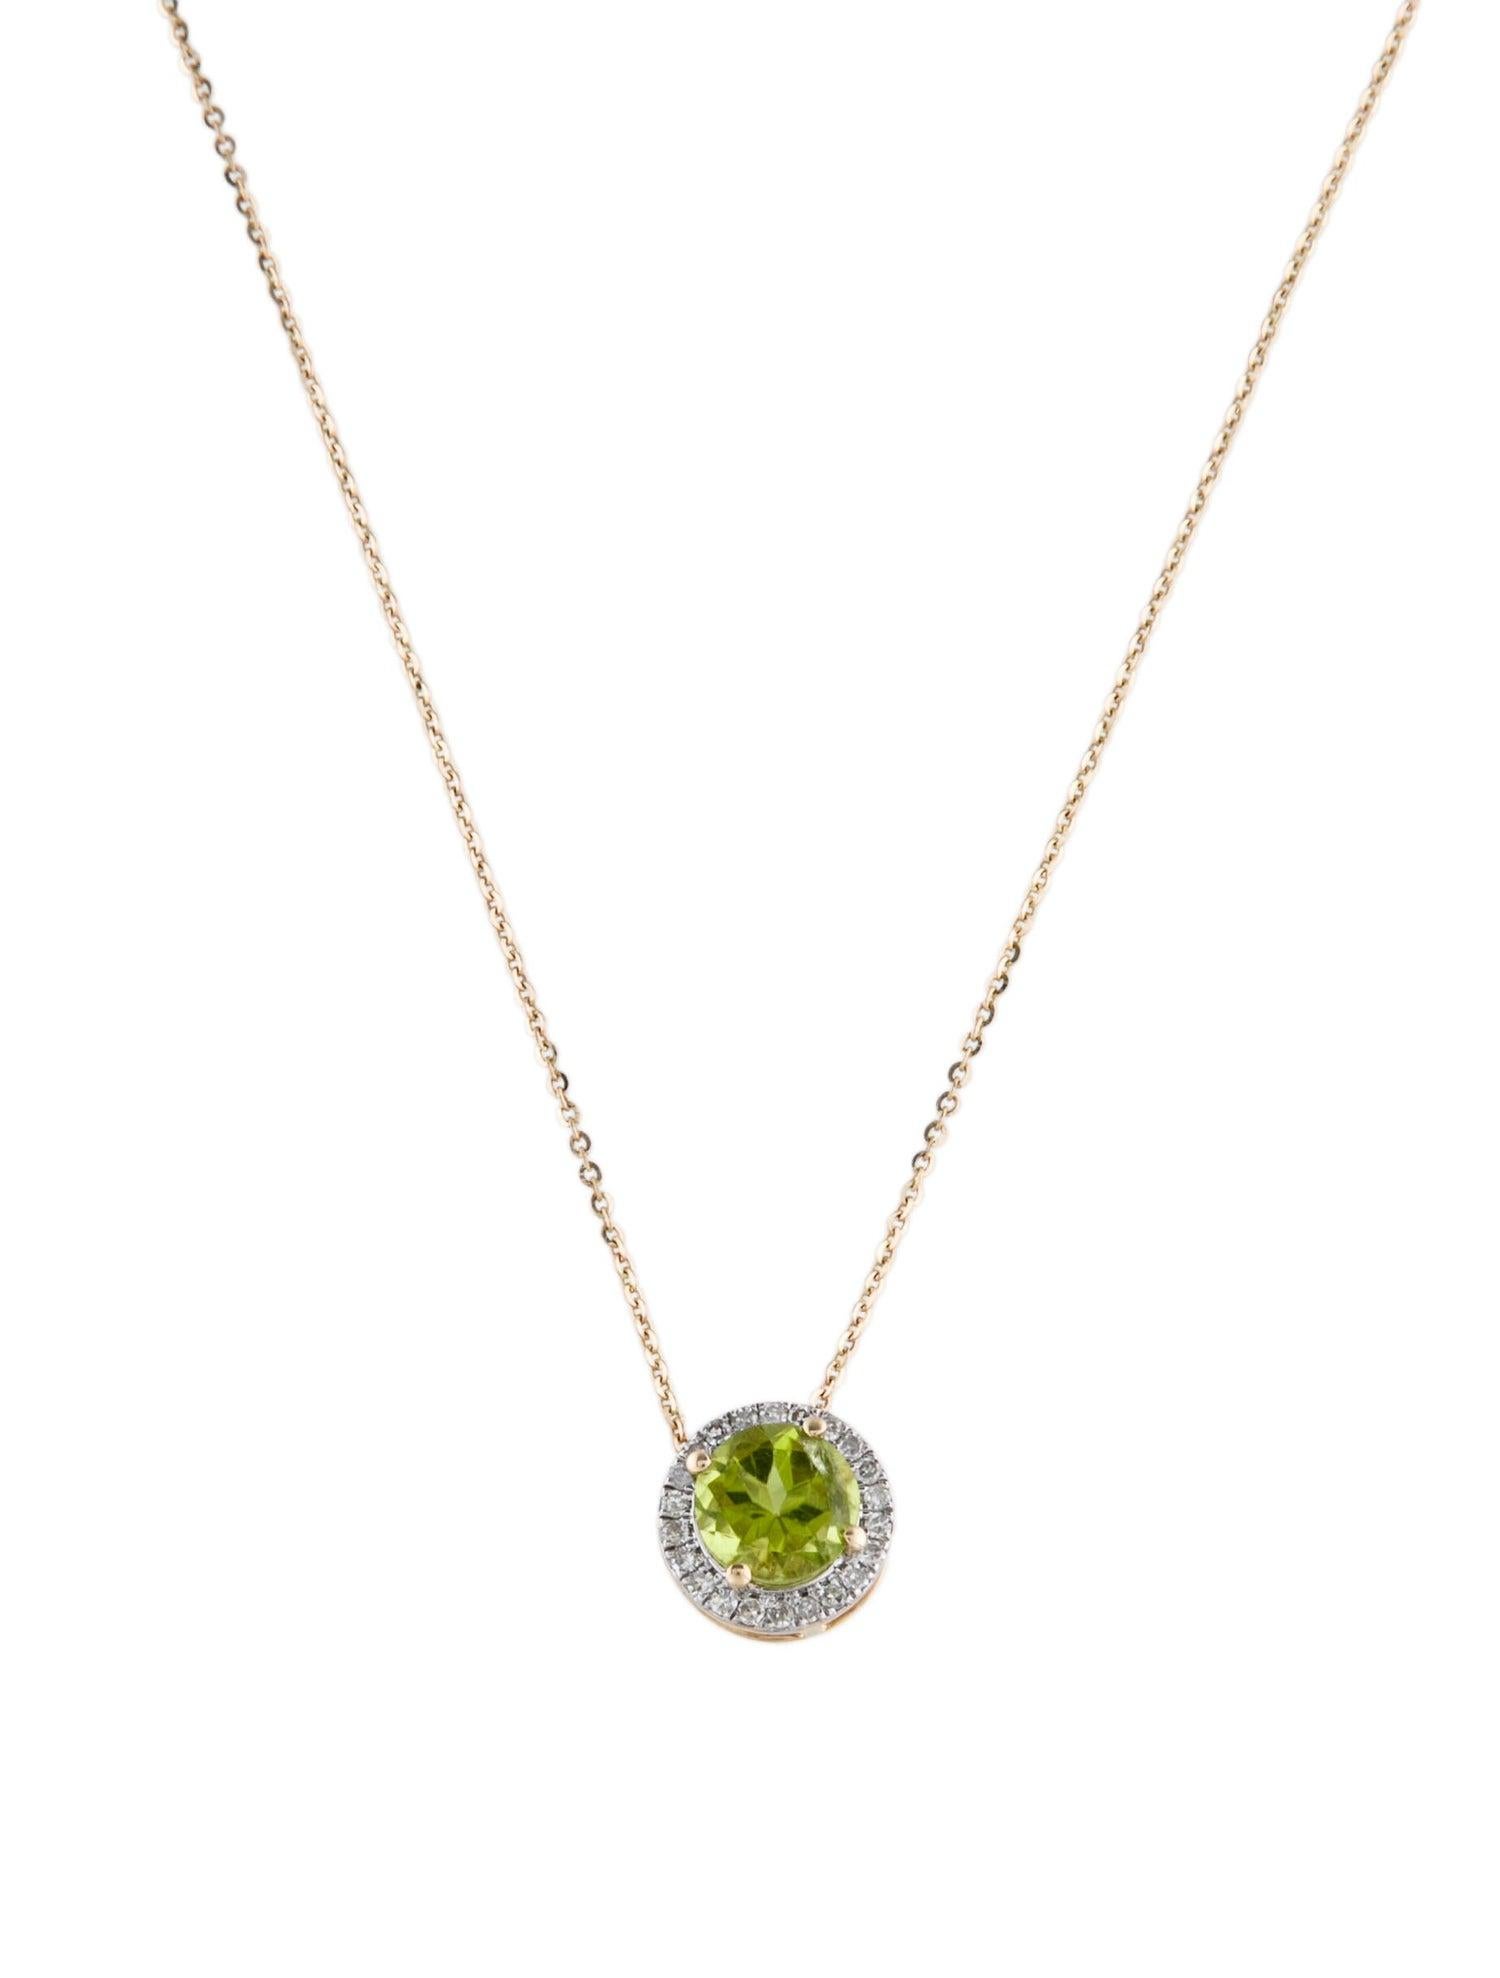 14K 1.64ctw Peridot & Diamond Pendant Necklace - Elegant Statement Jewelry In New Condition For Sale In Holtsville, NY